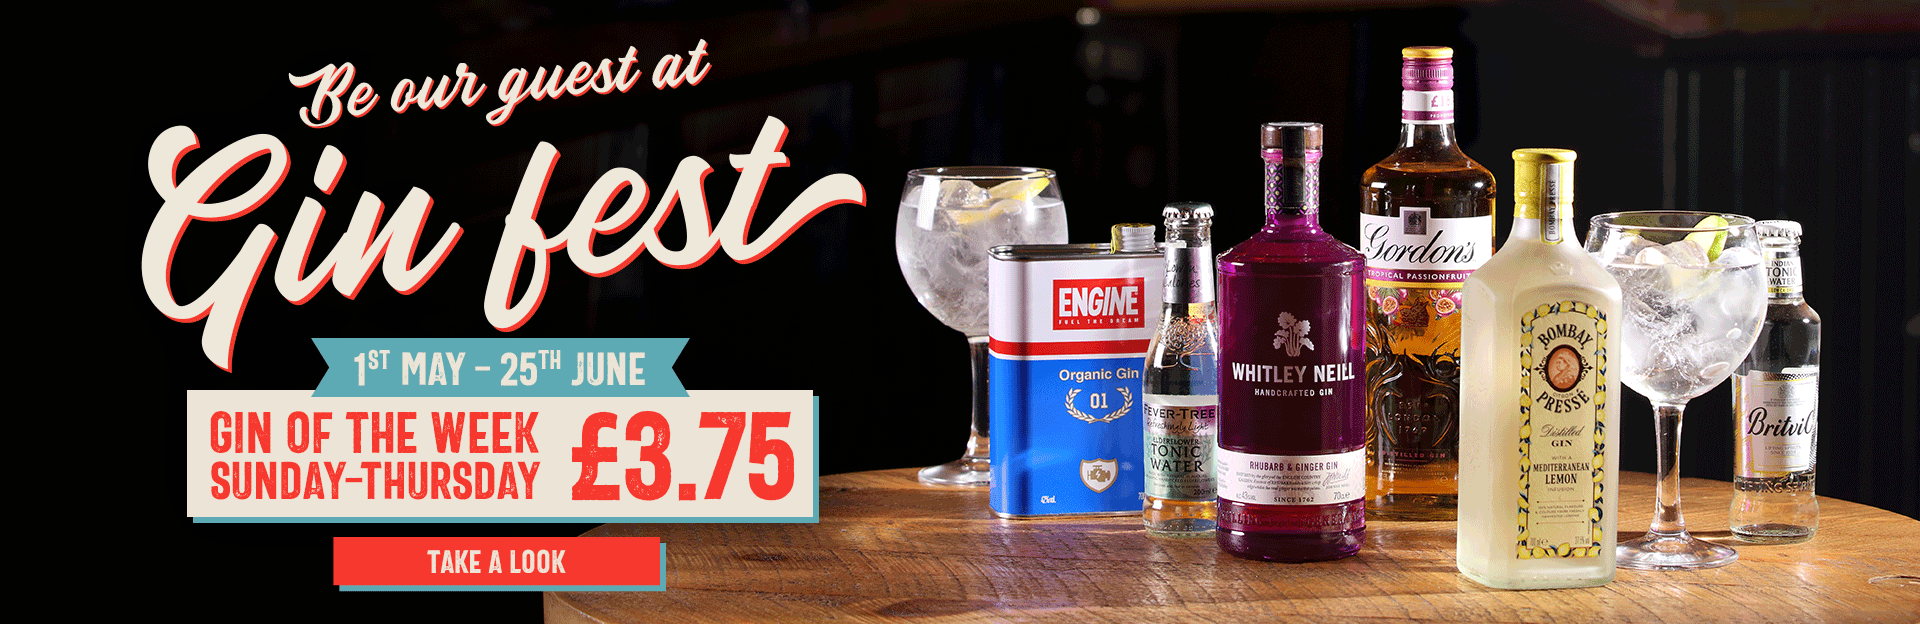 Gin Fest at The White Rose